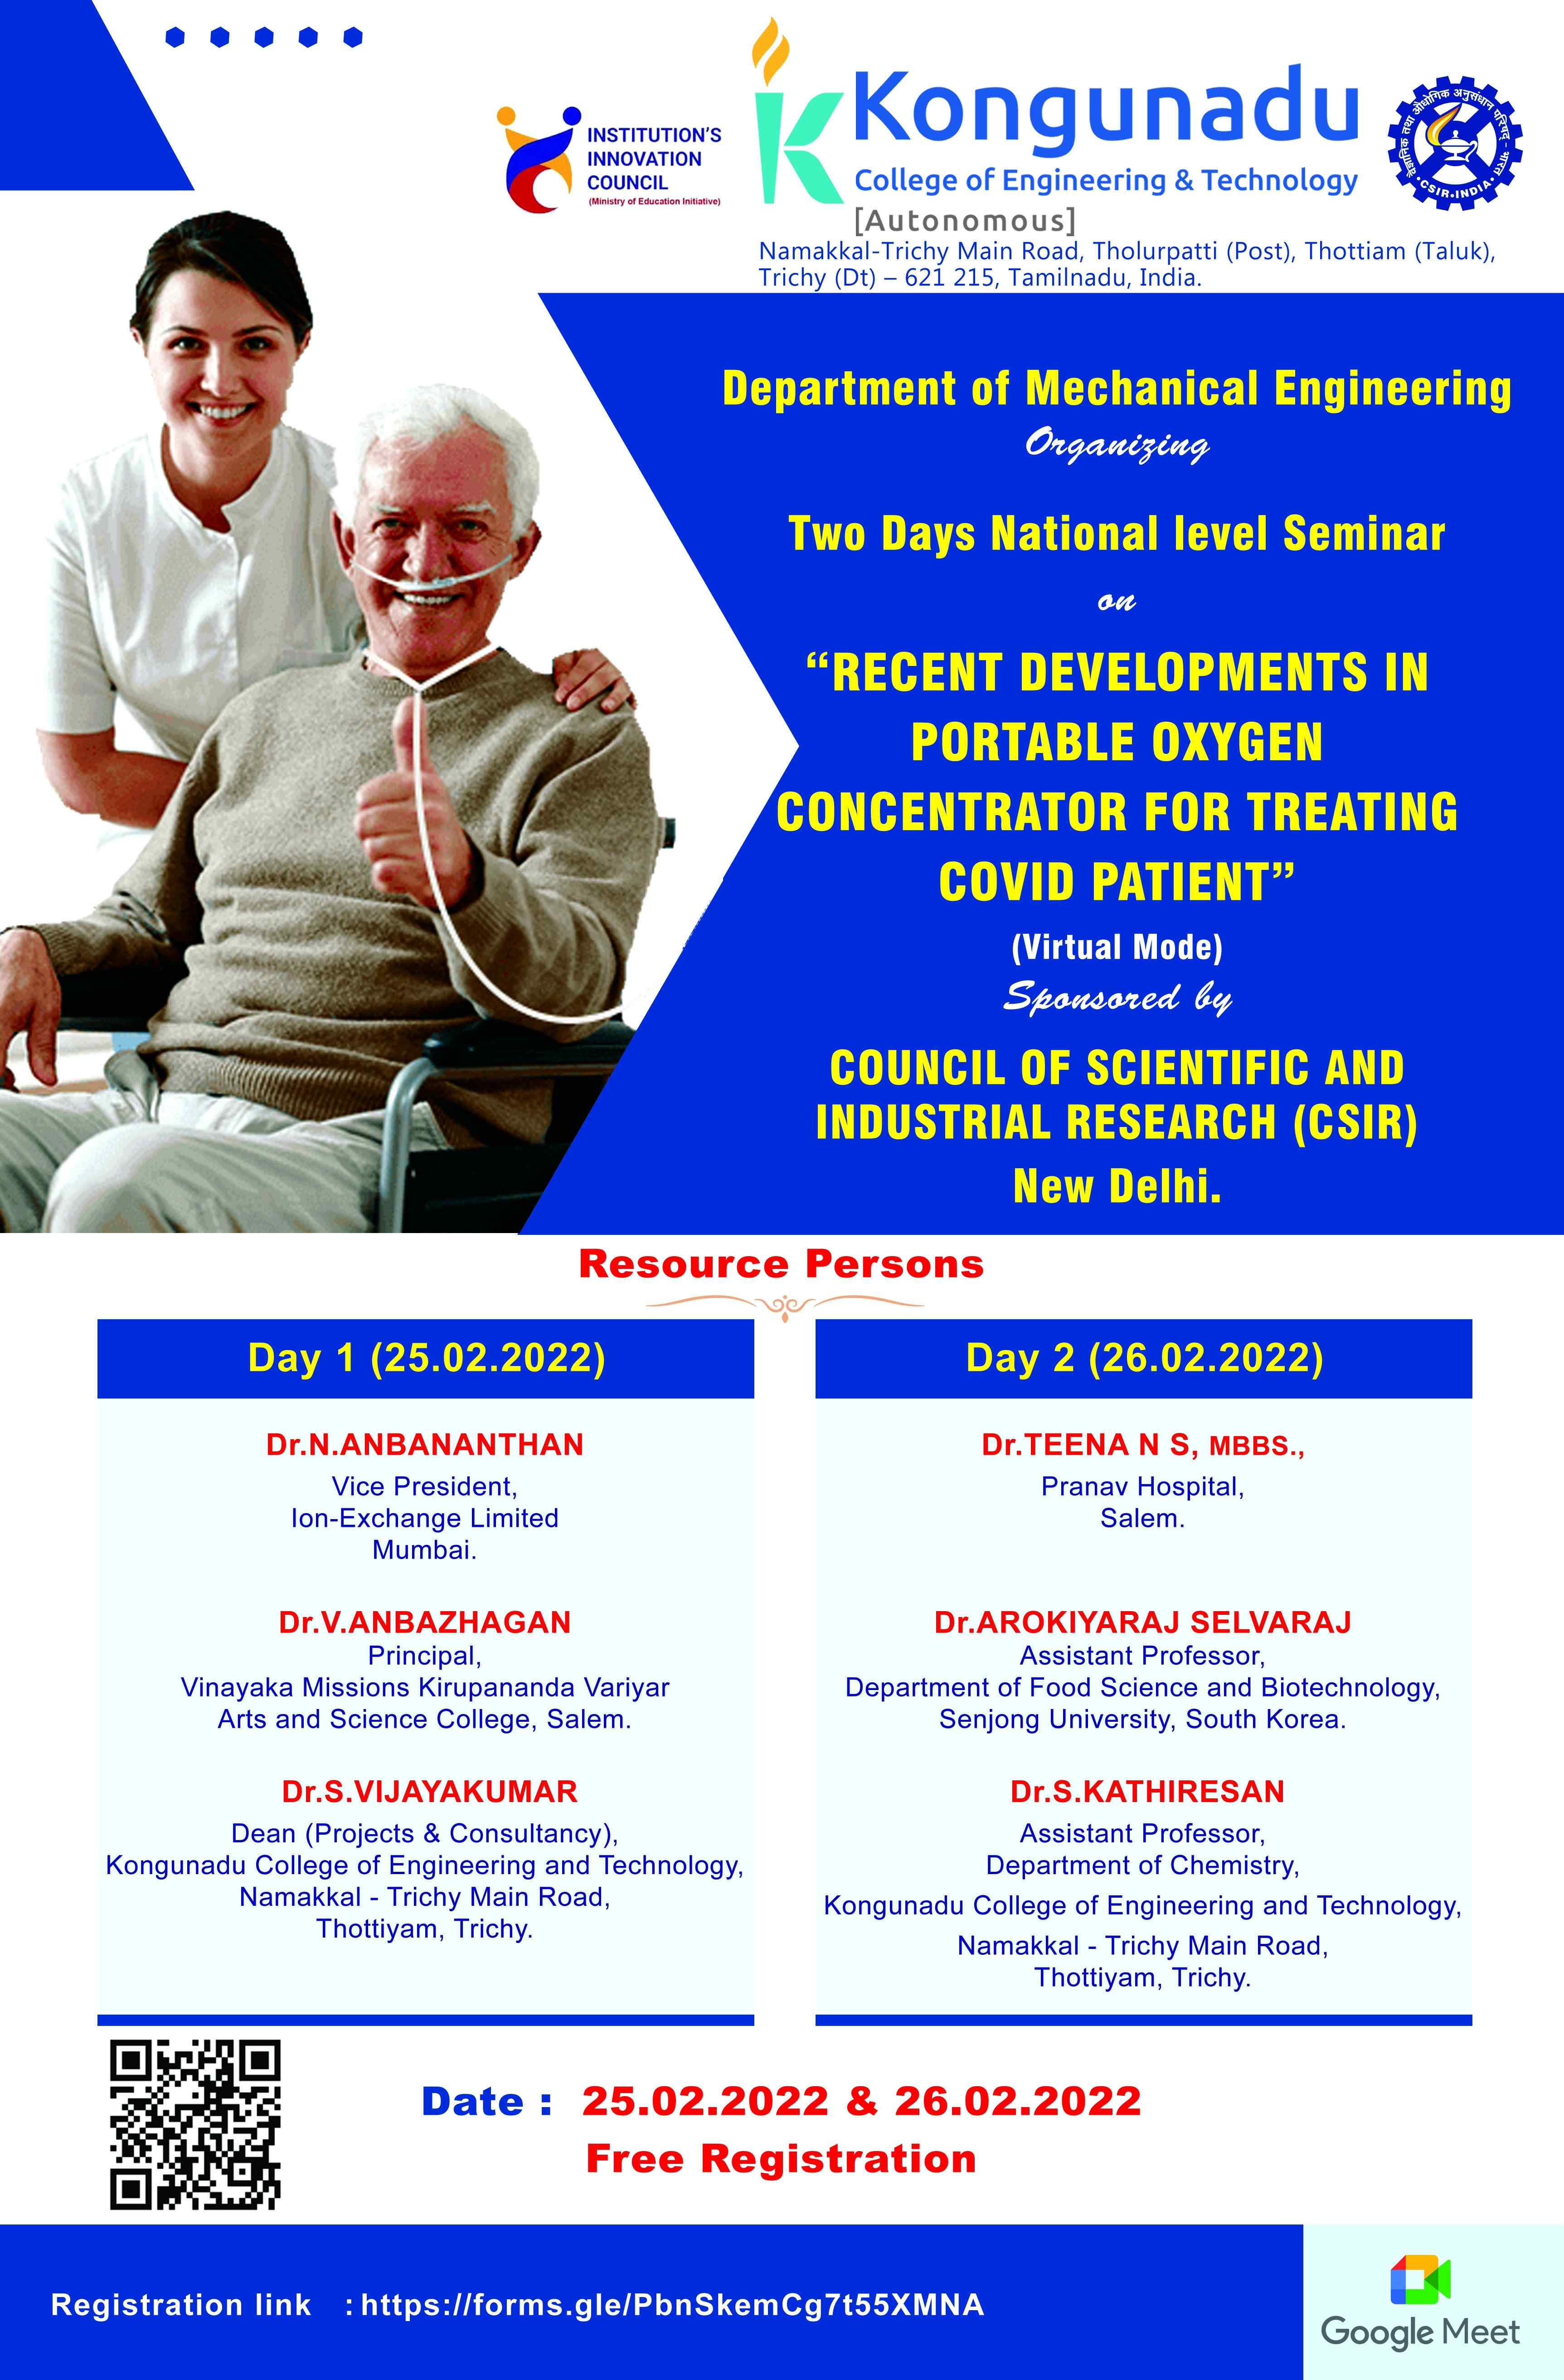 Two Days National level Seminar on Recent Developments in Portable Oxygen Concentrator for Treating Covid Patient 2022